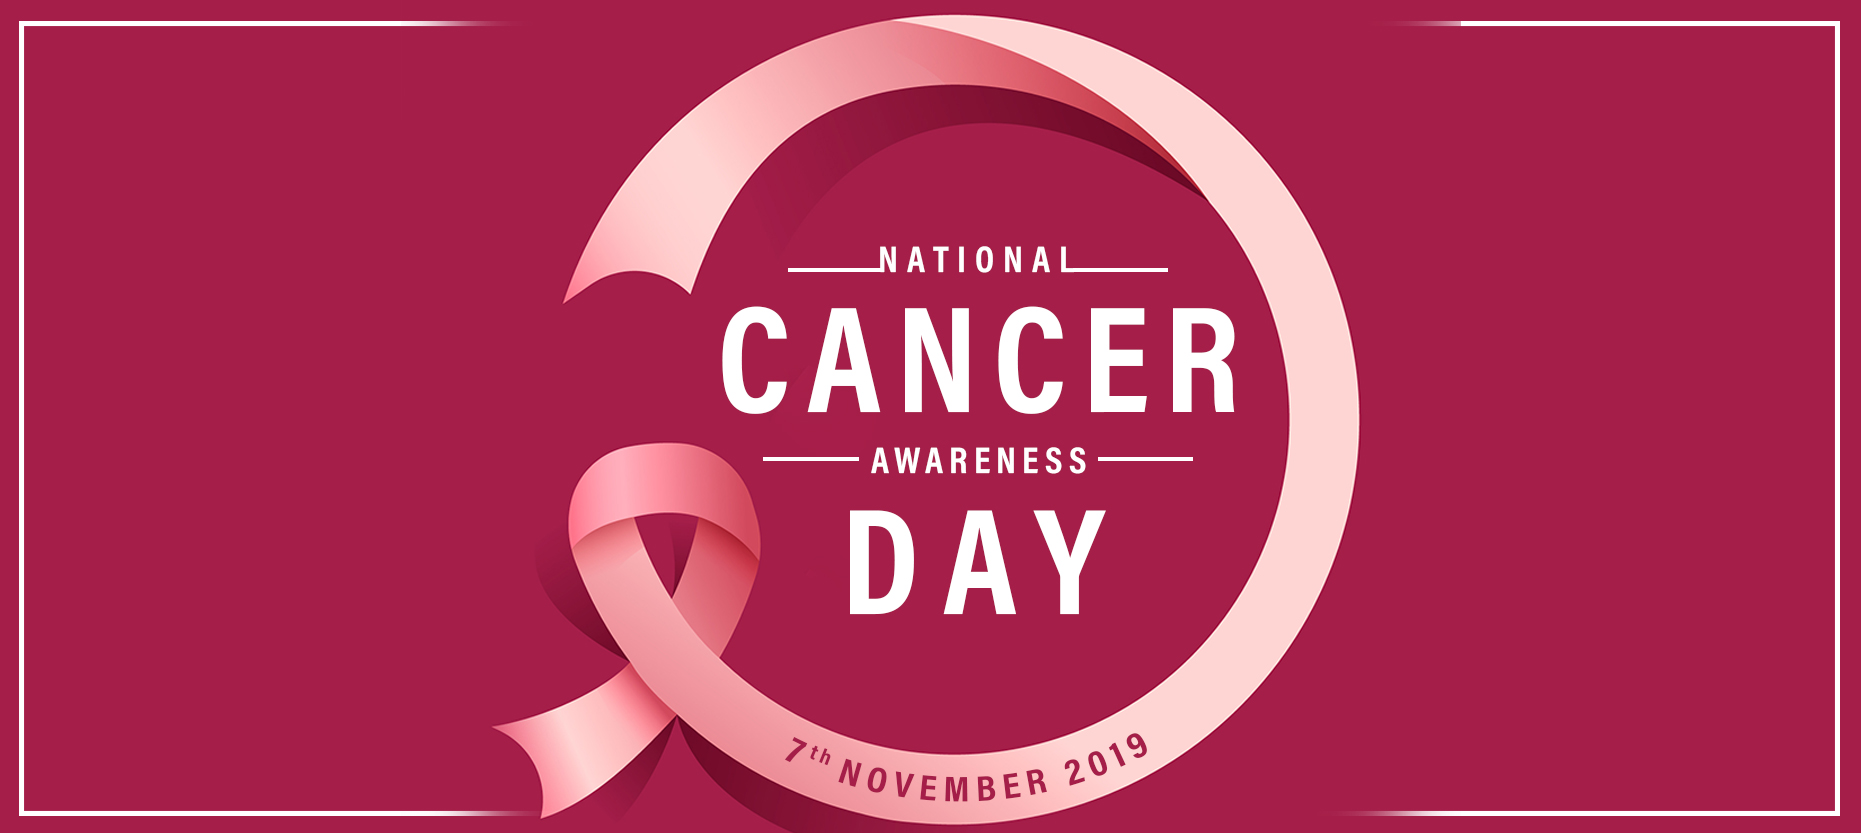 National Cancer Awareness Day 2019 -Things to Know about Cancer